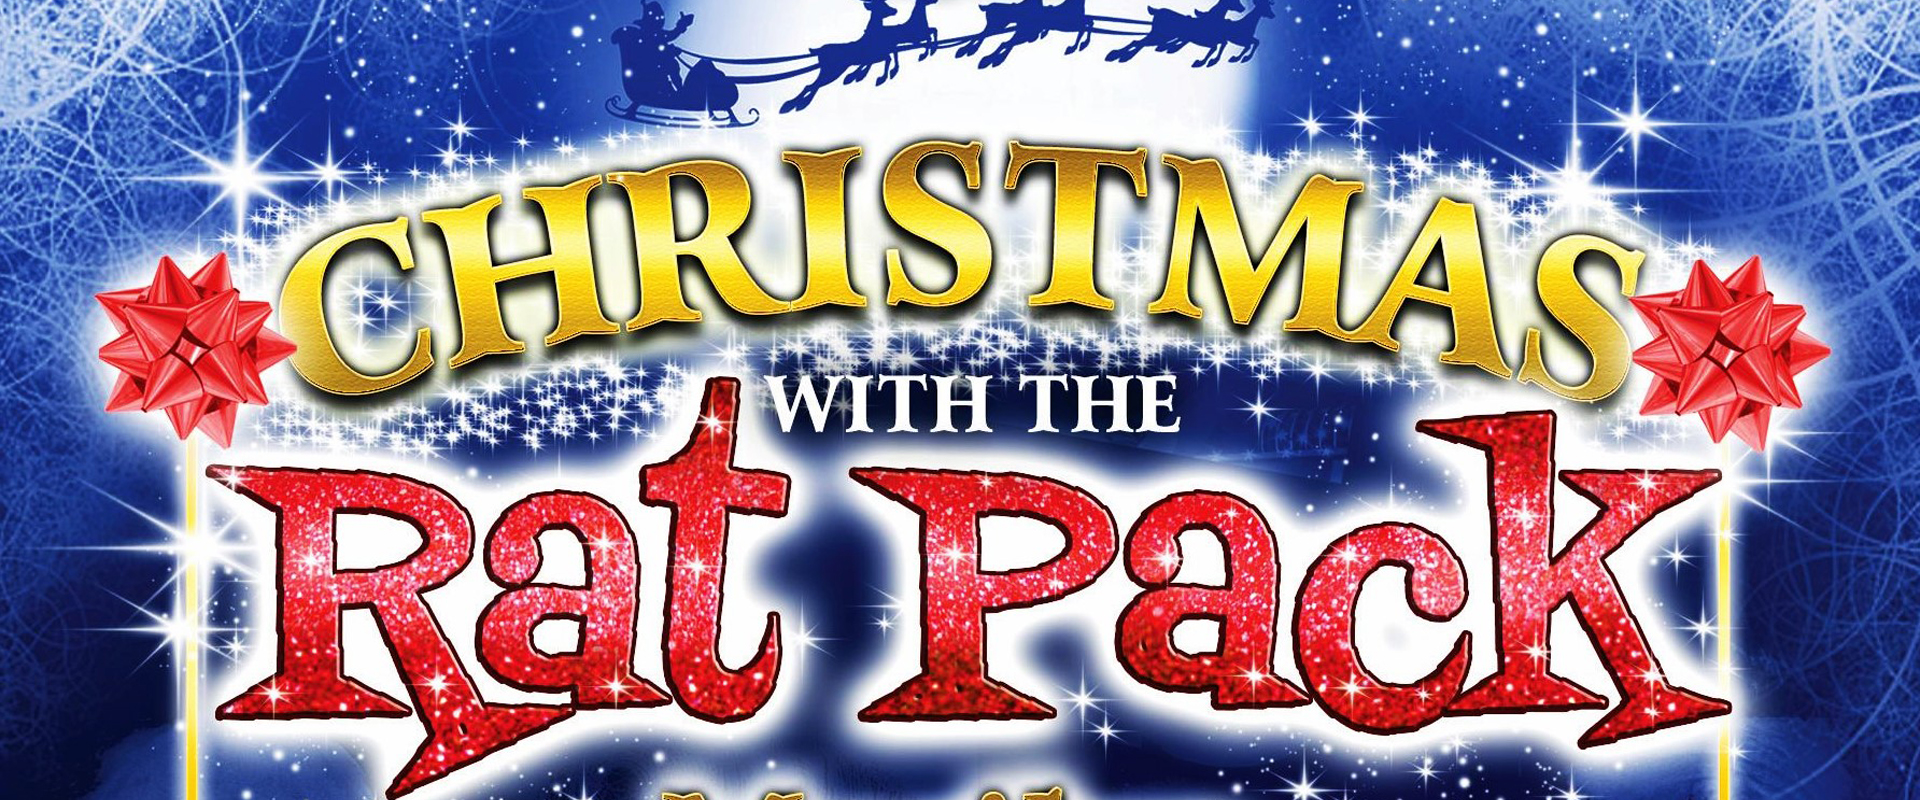 The Rat Pack Christmas Show